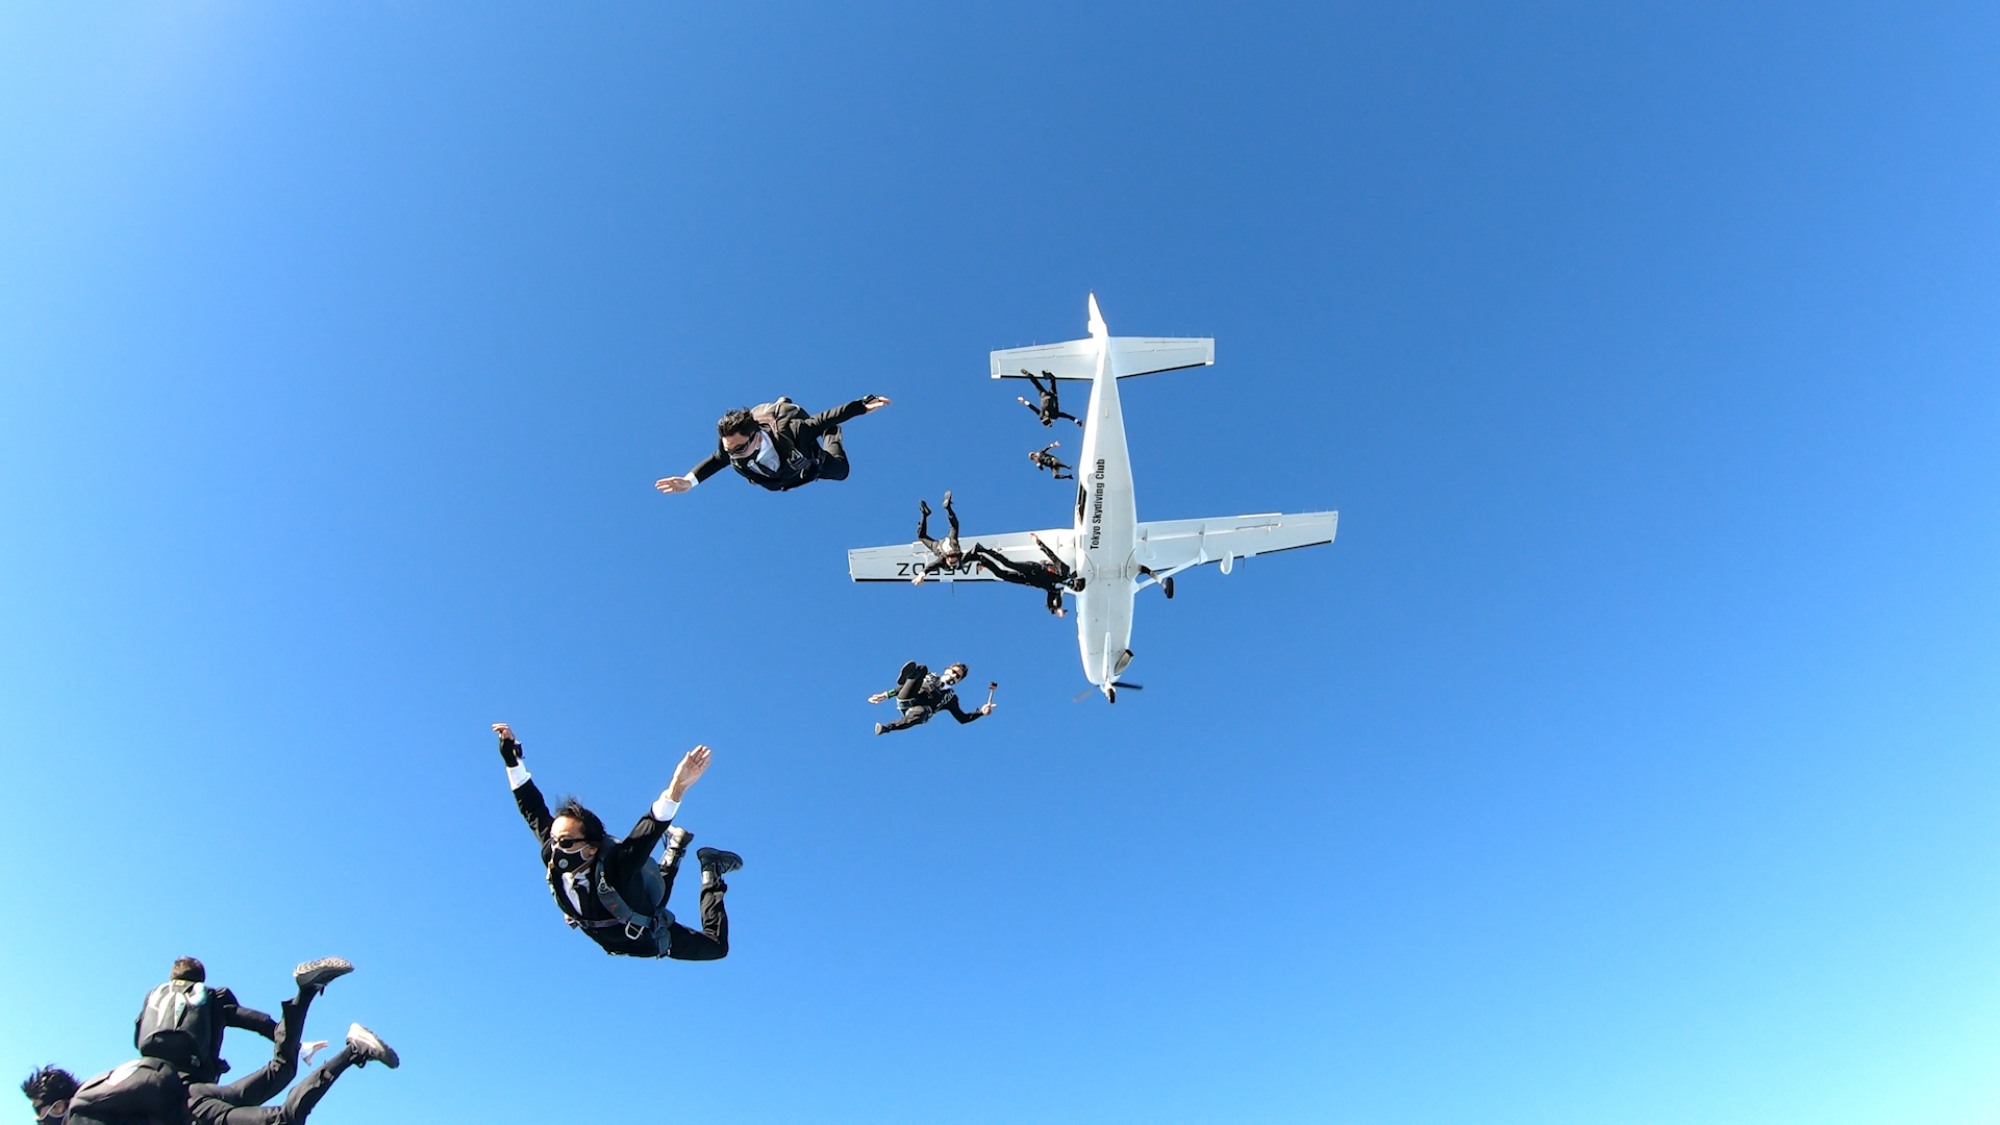 A group of men in dark suits and sunglasses dive from a plane in a blue sky, seen from below.